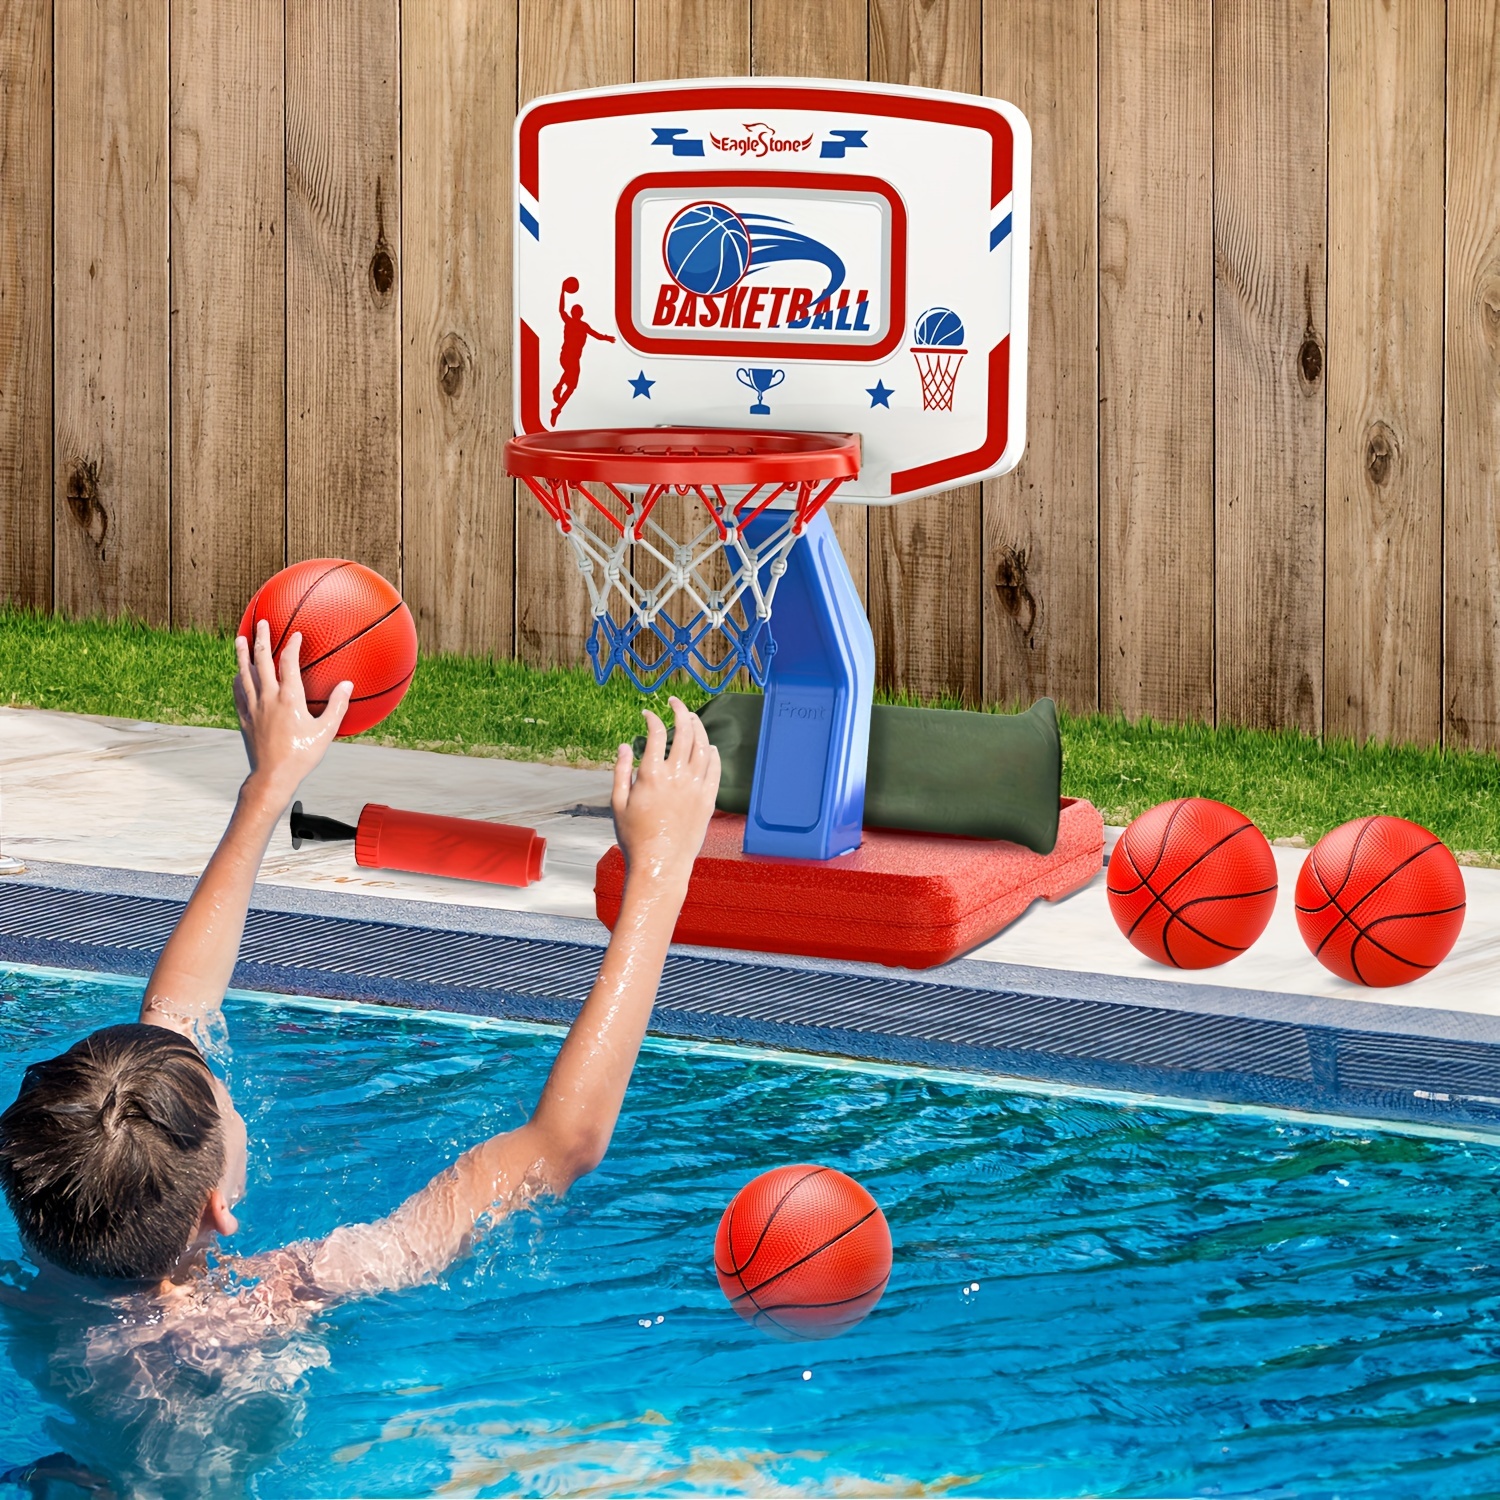 

Eaglestone Pool Basketball Hoop Poolside, Height Adjustable Basketball Hoop With 4 Balls, Swimming Poolside Outdoor Water Toy For Kids And Adults - Pool Basketball Games For Boys Girls Toys